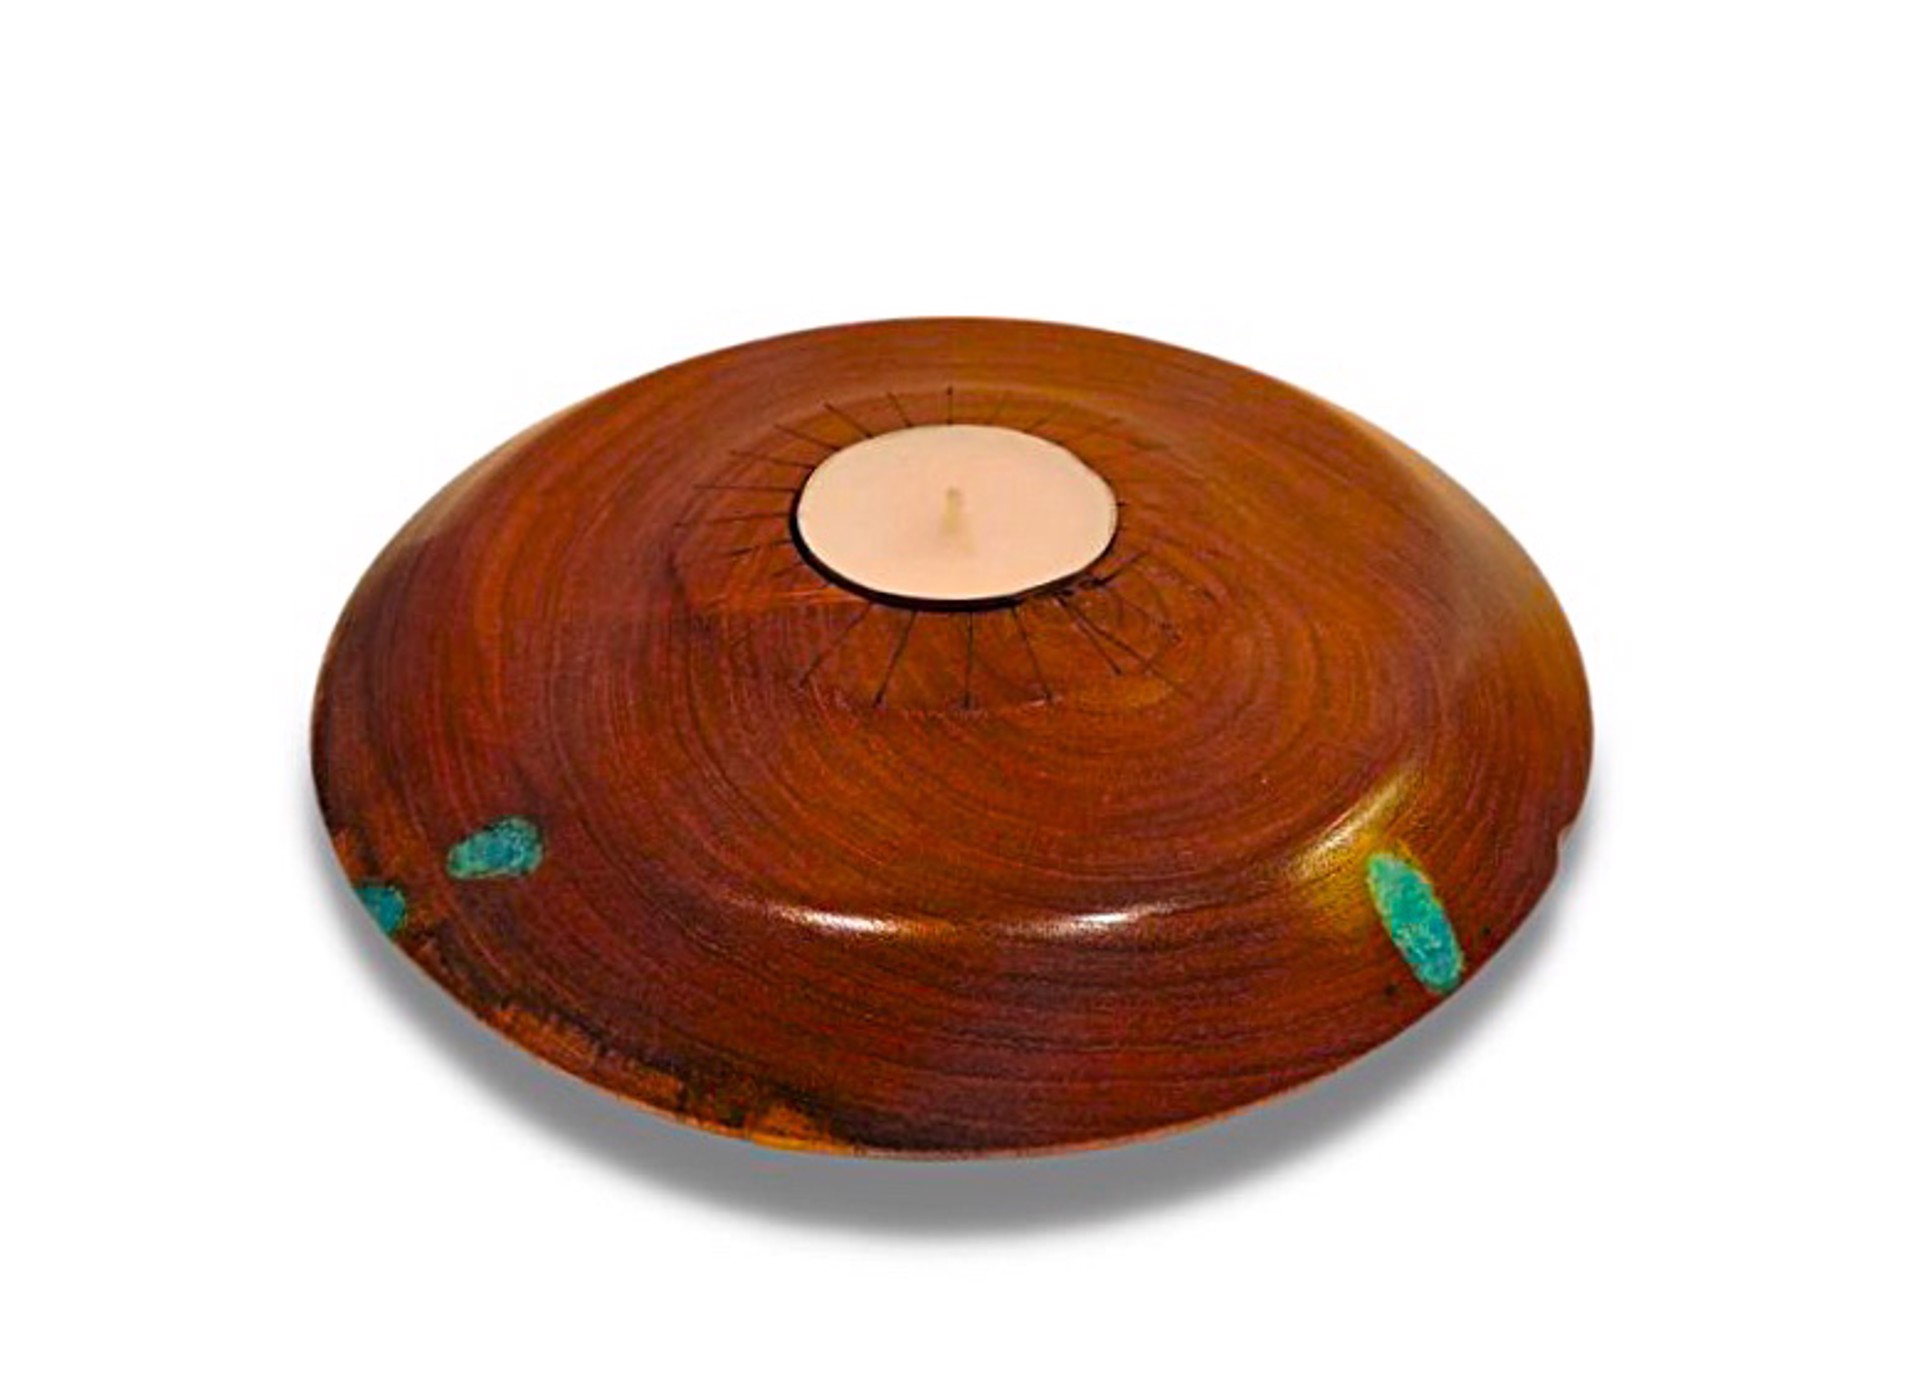 Mesquite Candle Holder by Jim Scott